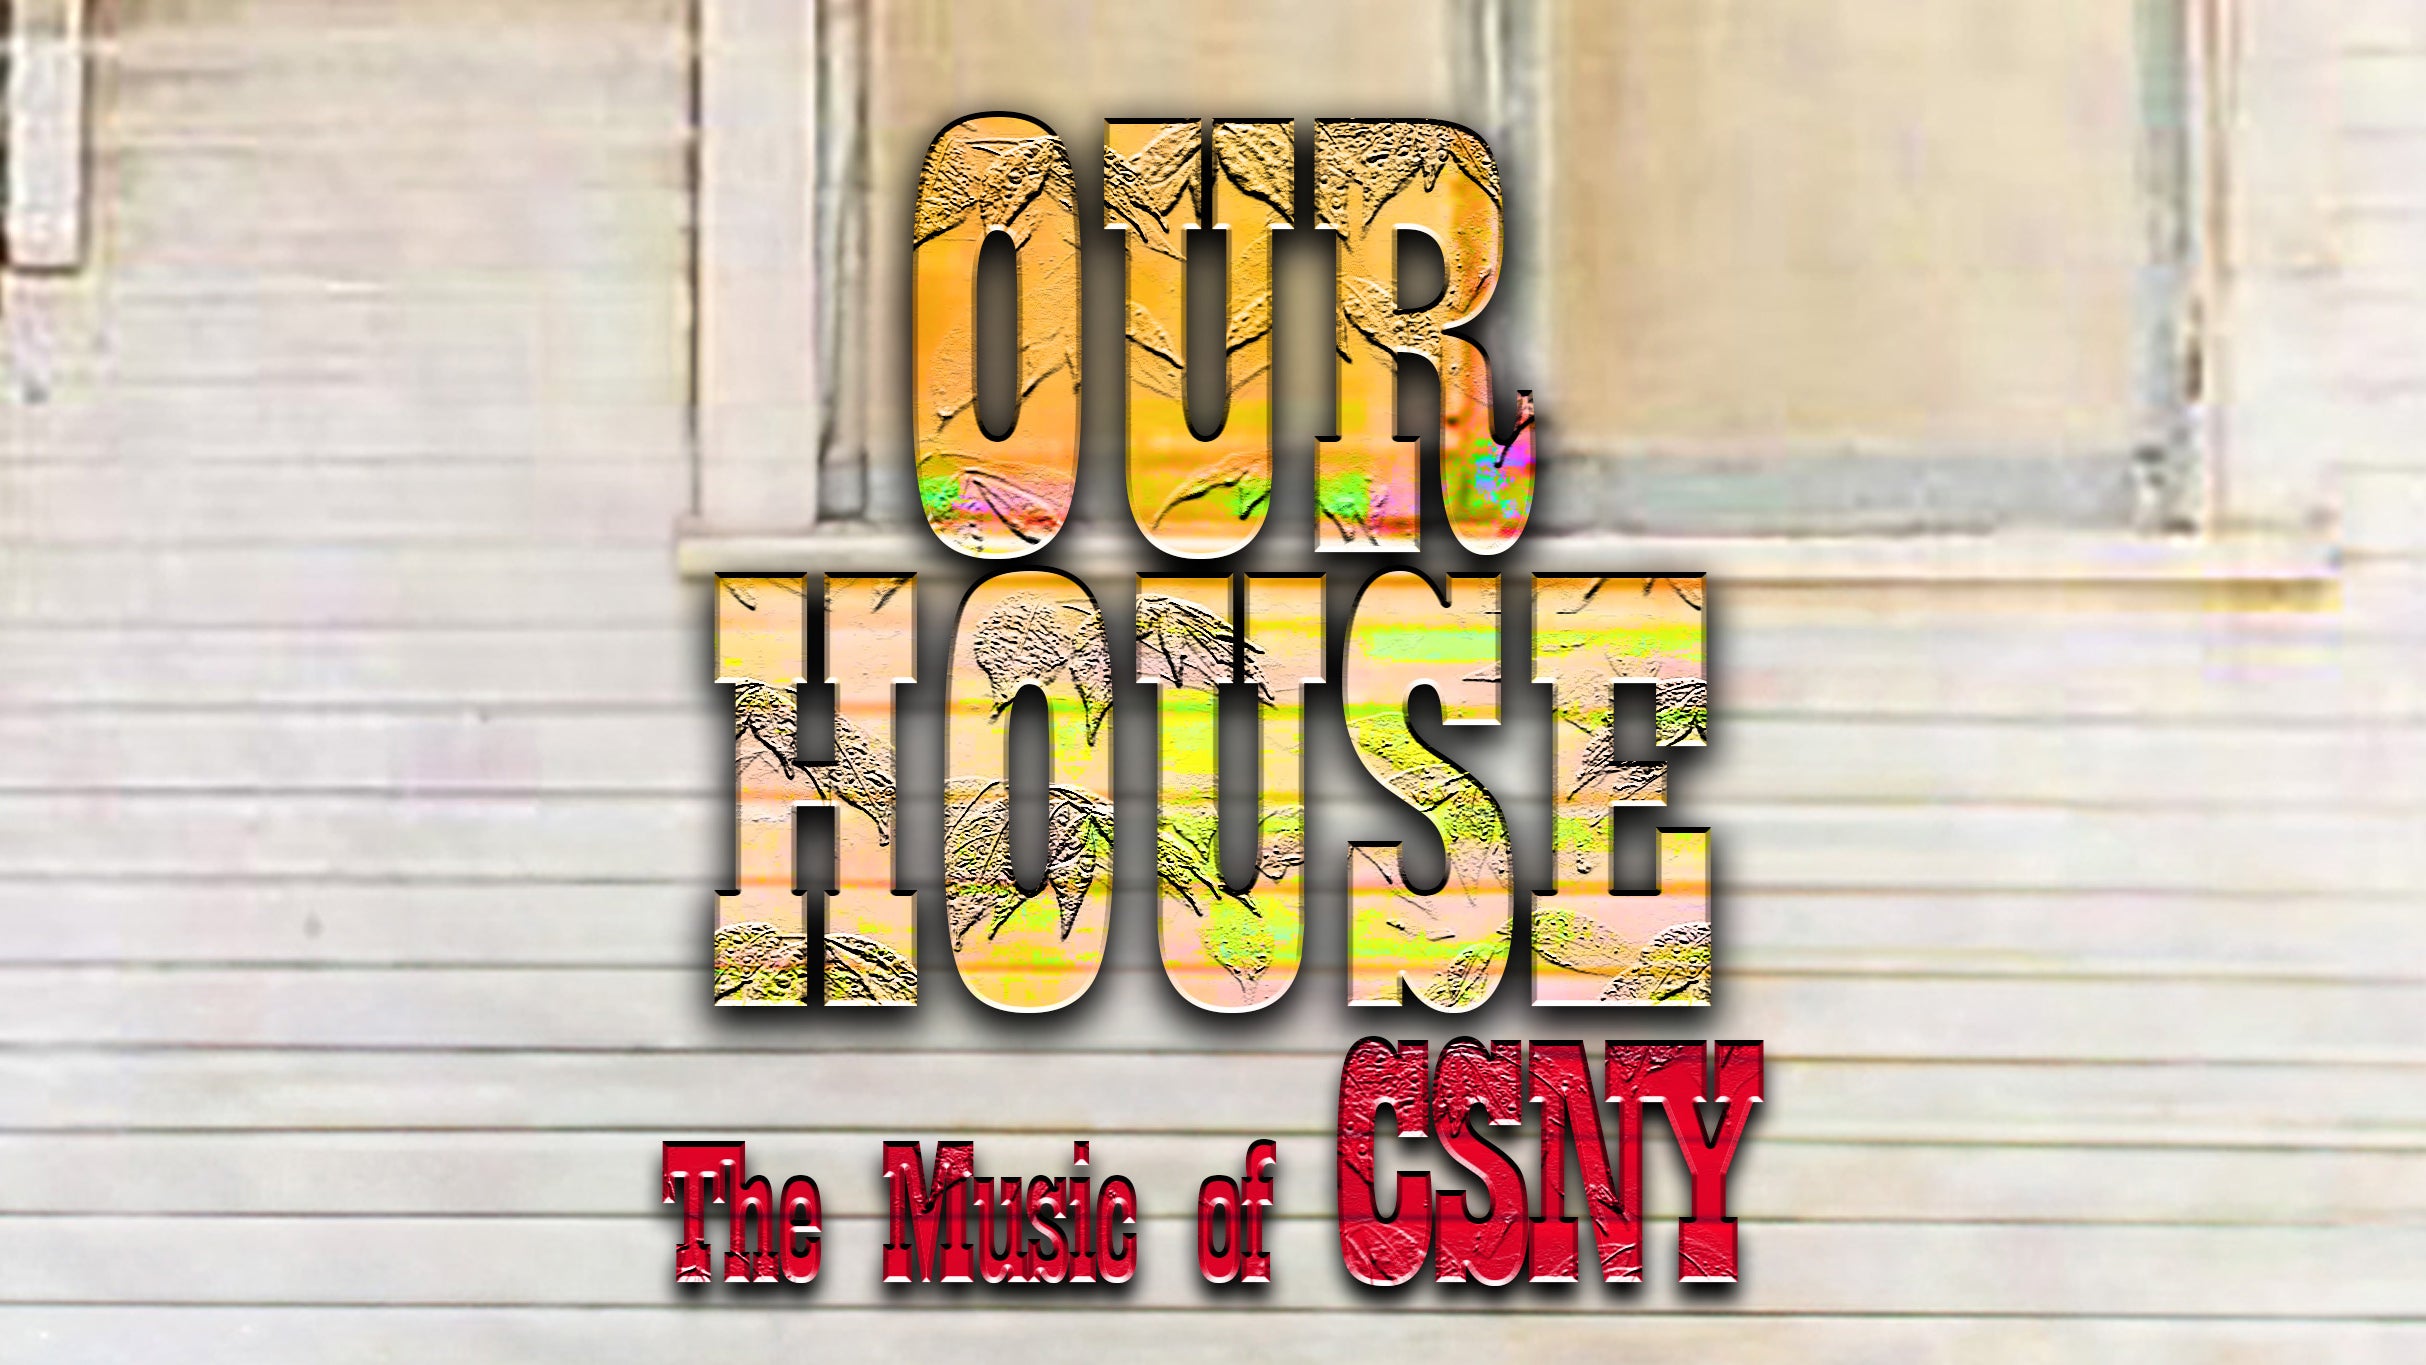 Our House: The Music Of Crosby, Stills, Nash & Young in Ft Lauderdale promo photo for Official Platinum presale offer code